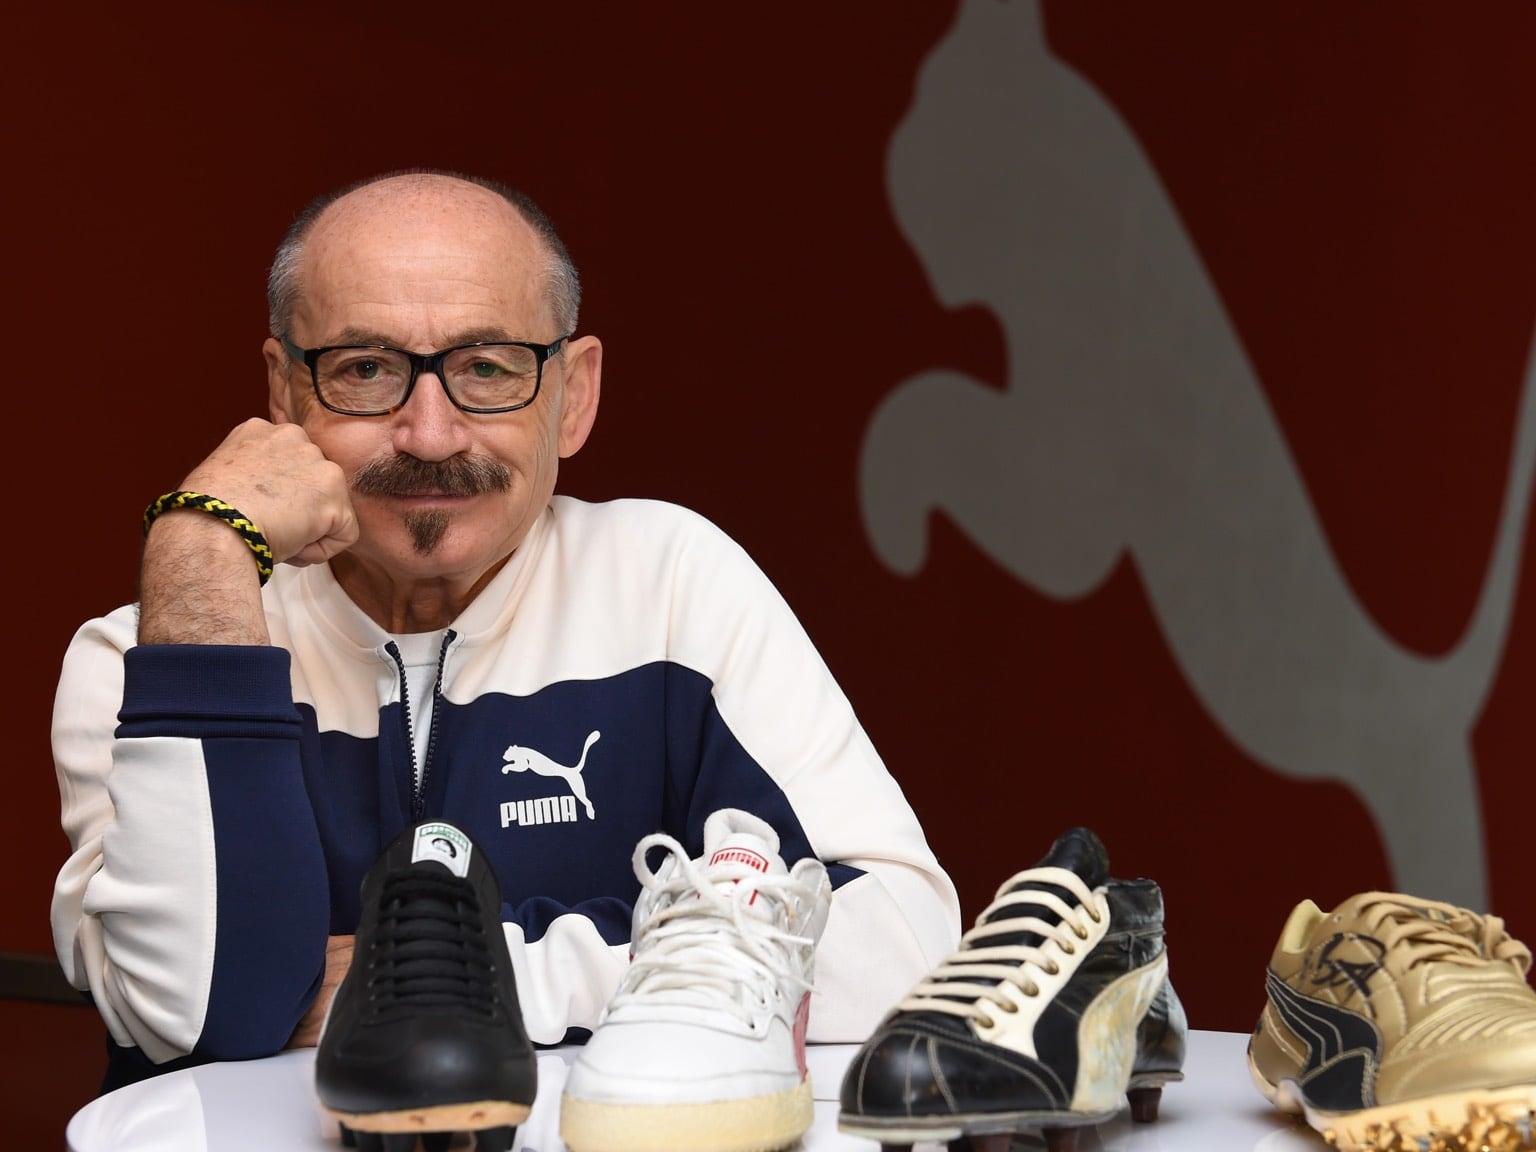 Helmut Fischer with four PUMA shoes